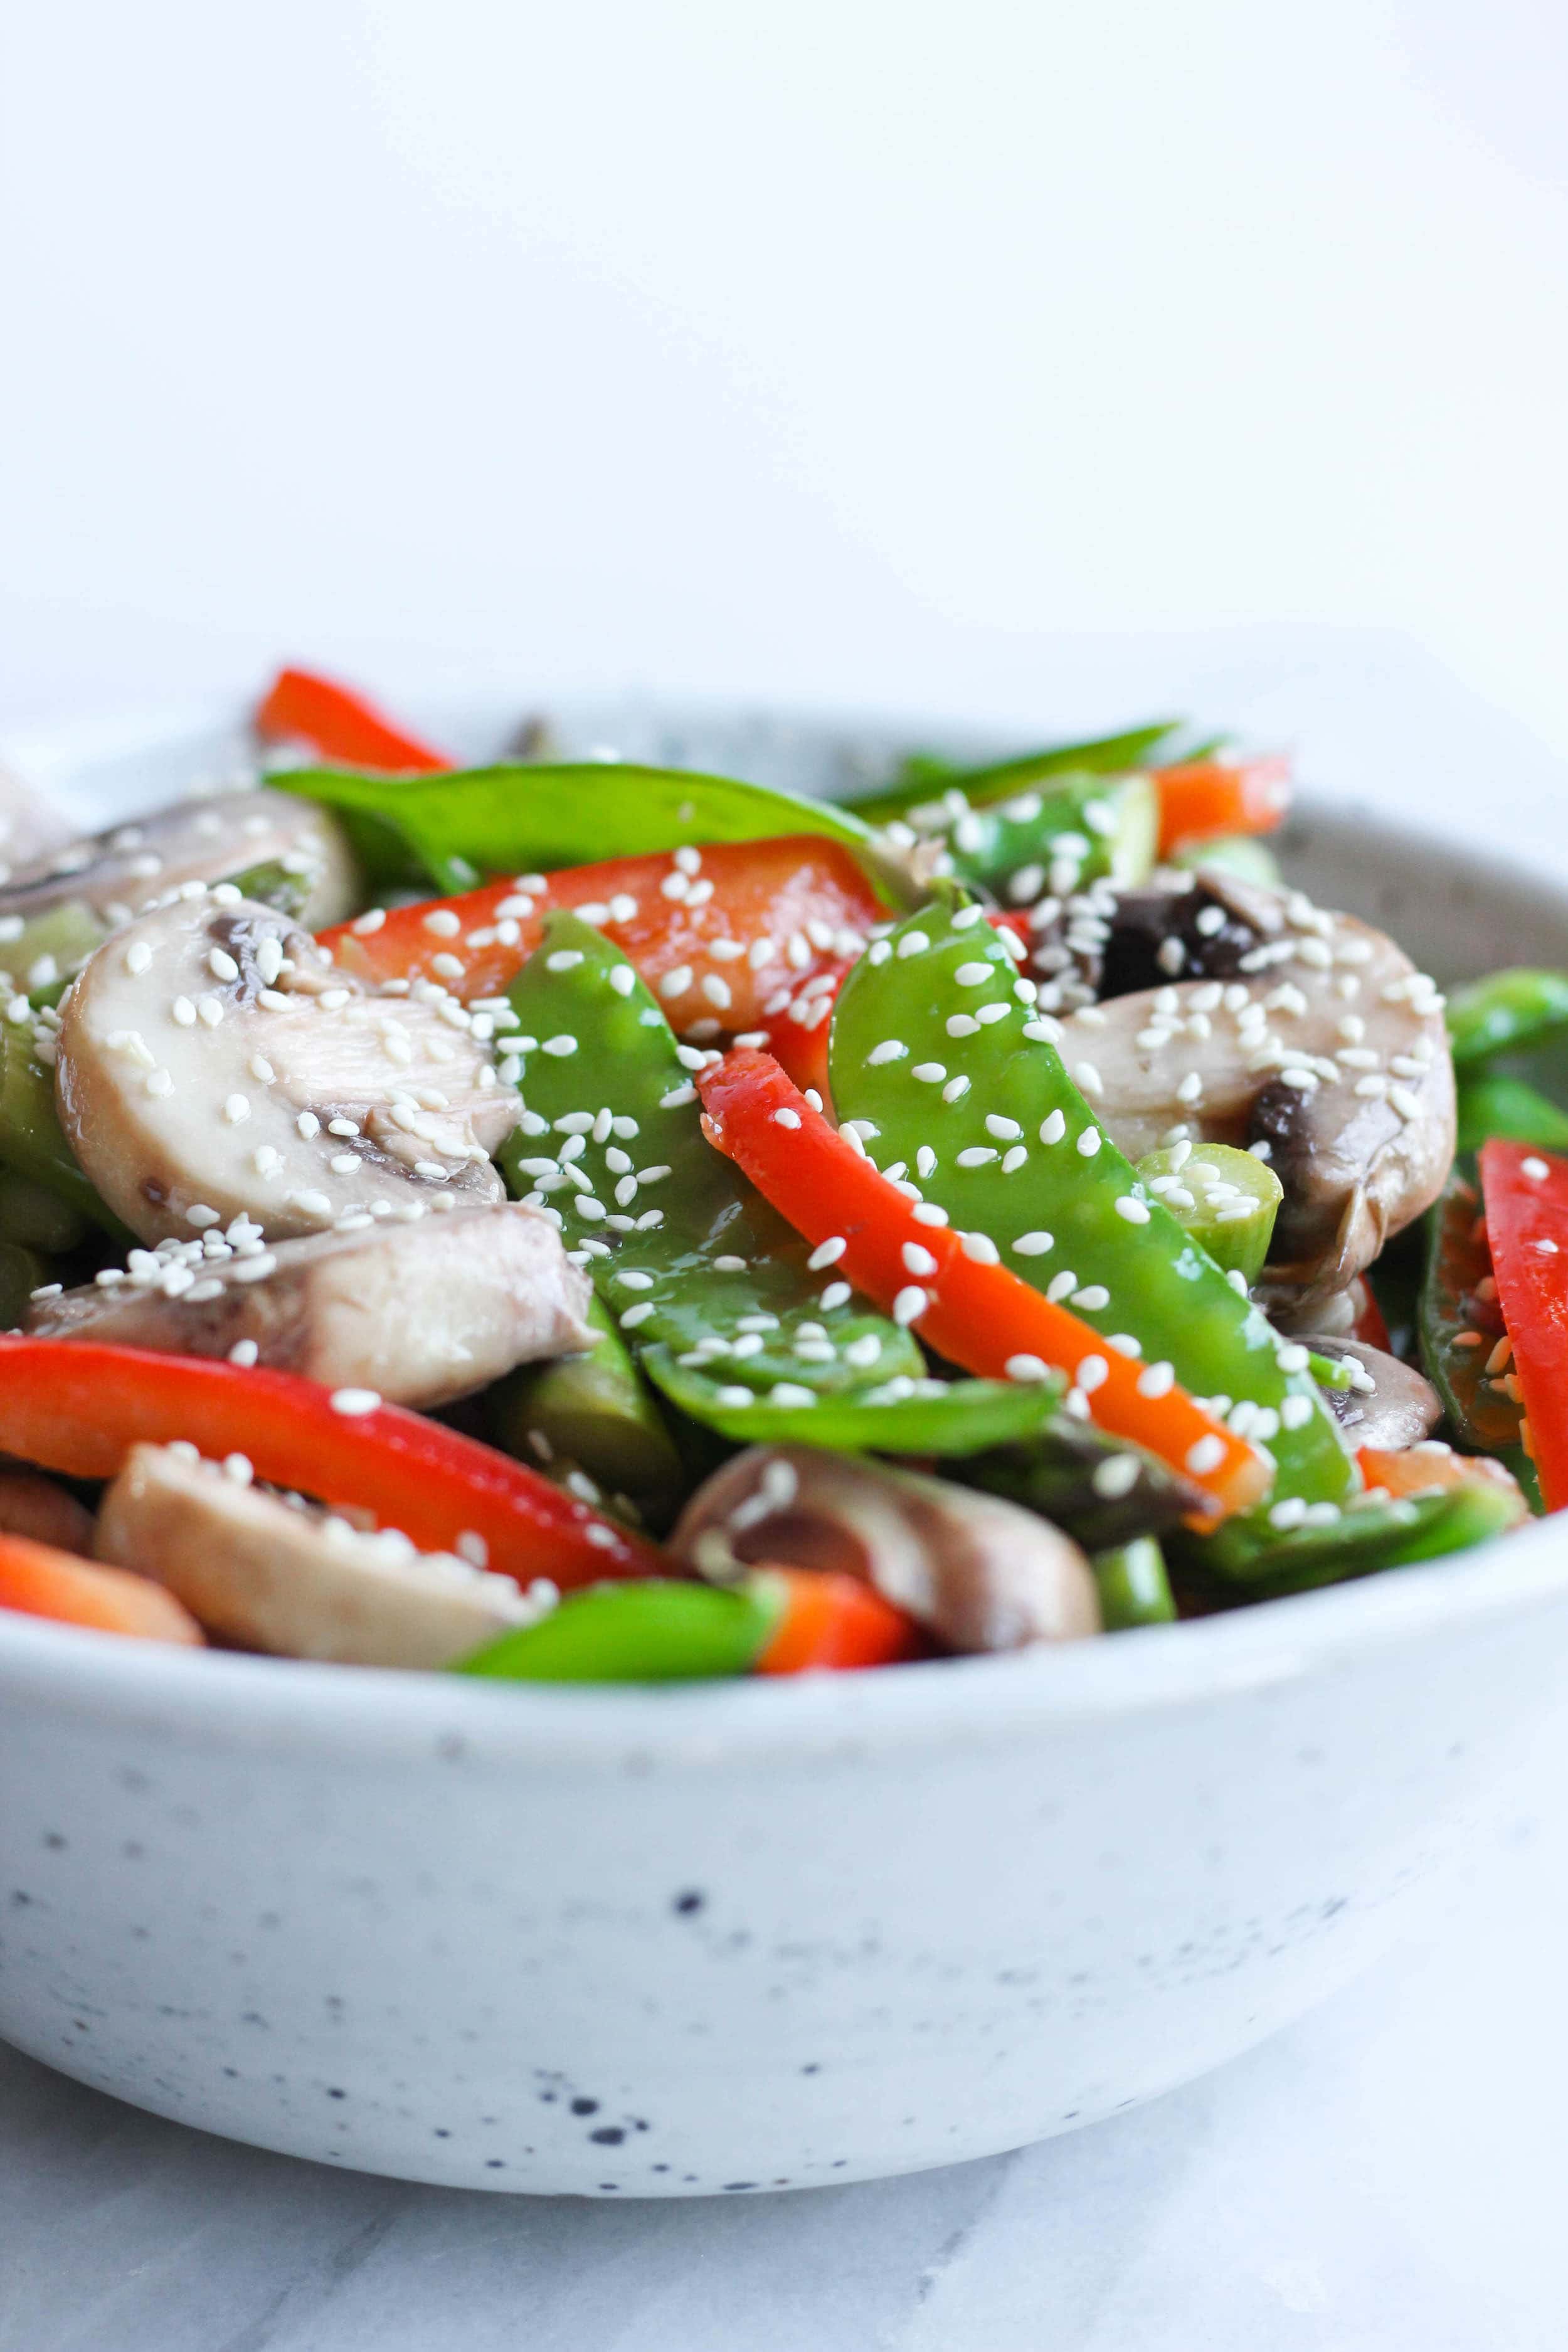 A bowl with red peppers, mushrooms, and pea pods topped with sesame seeds